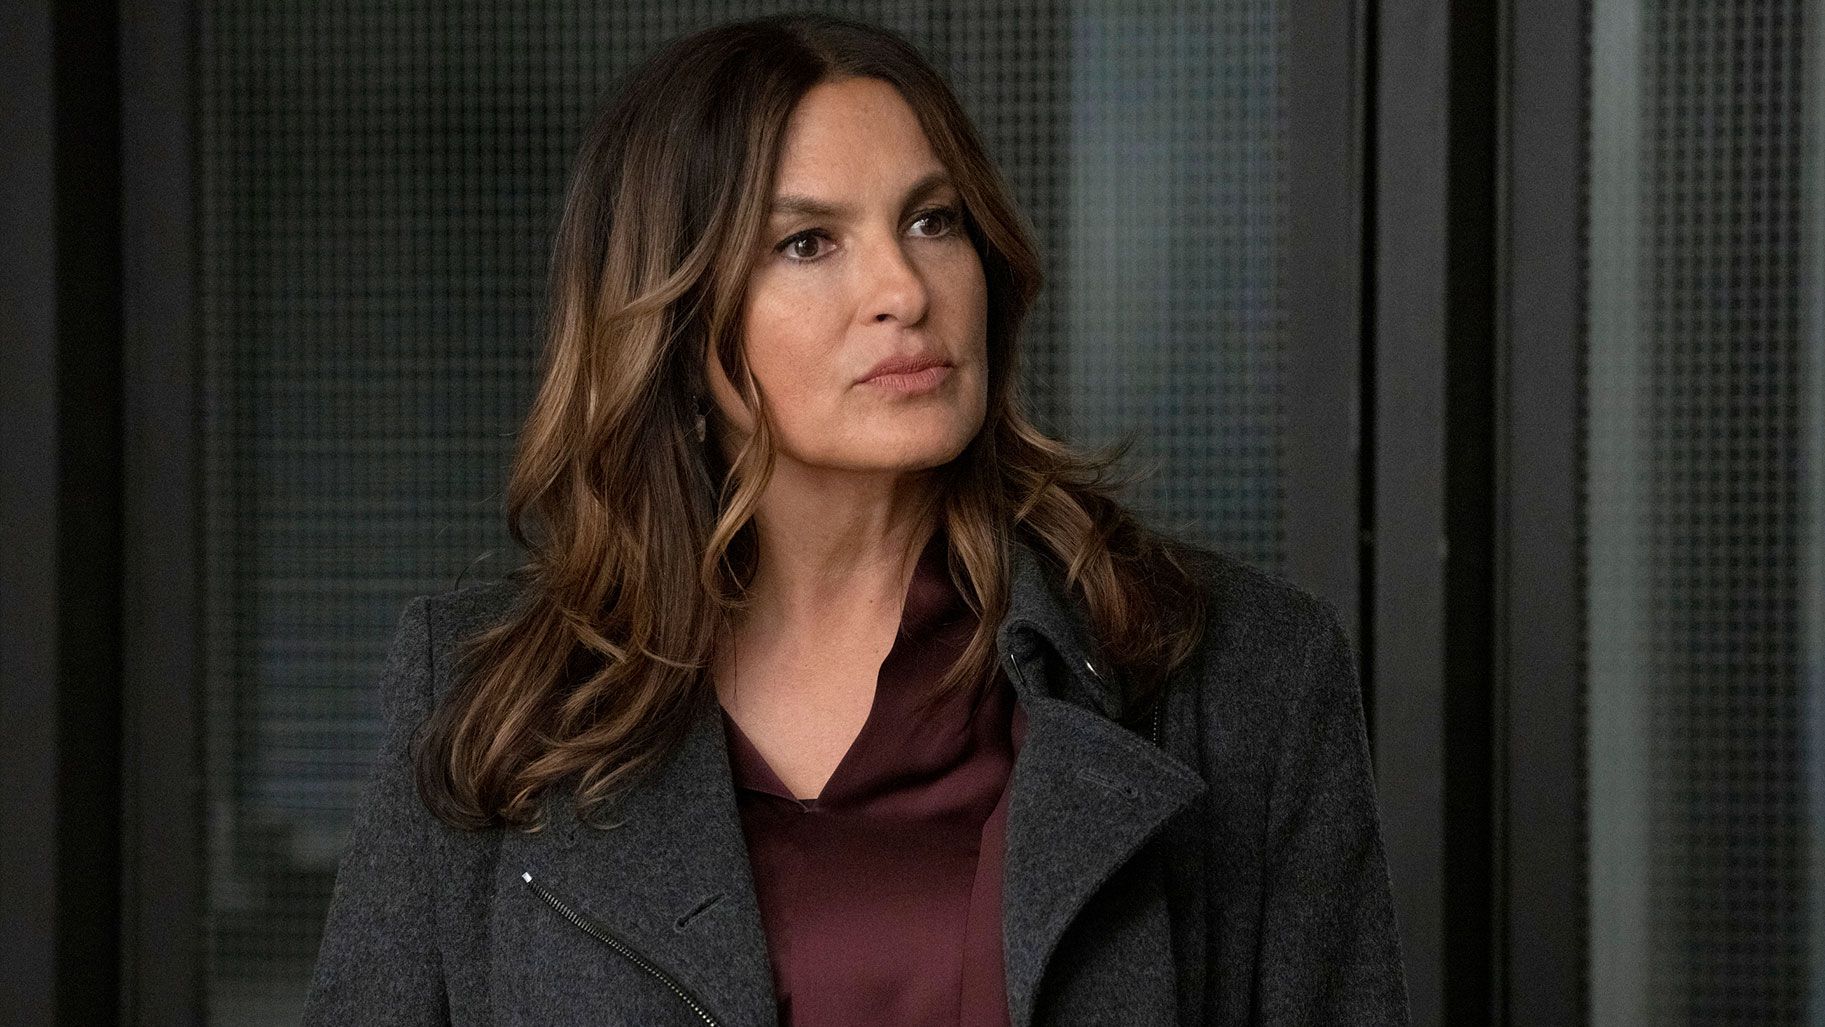 https://hips.hearstapps.com/hmg-prod/images/law-and-order-svu-season-25-release-date-cast-episodes-news-655ce0f6c5160.jpeg?crop=1xw:0.8435188989317995xh;center,top